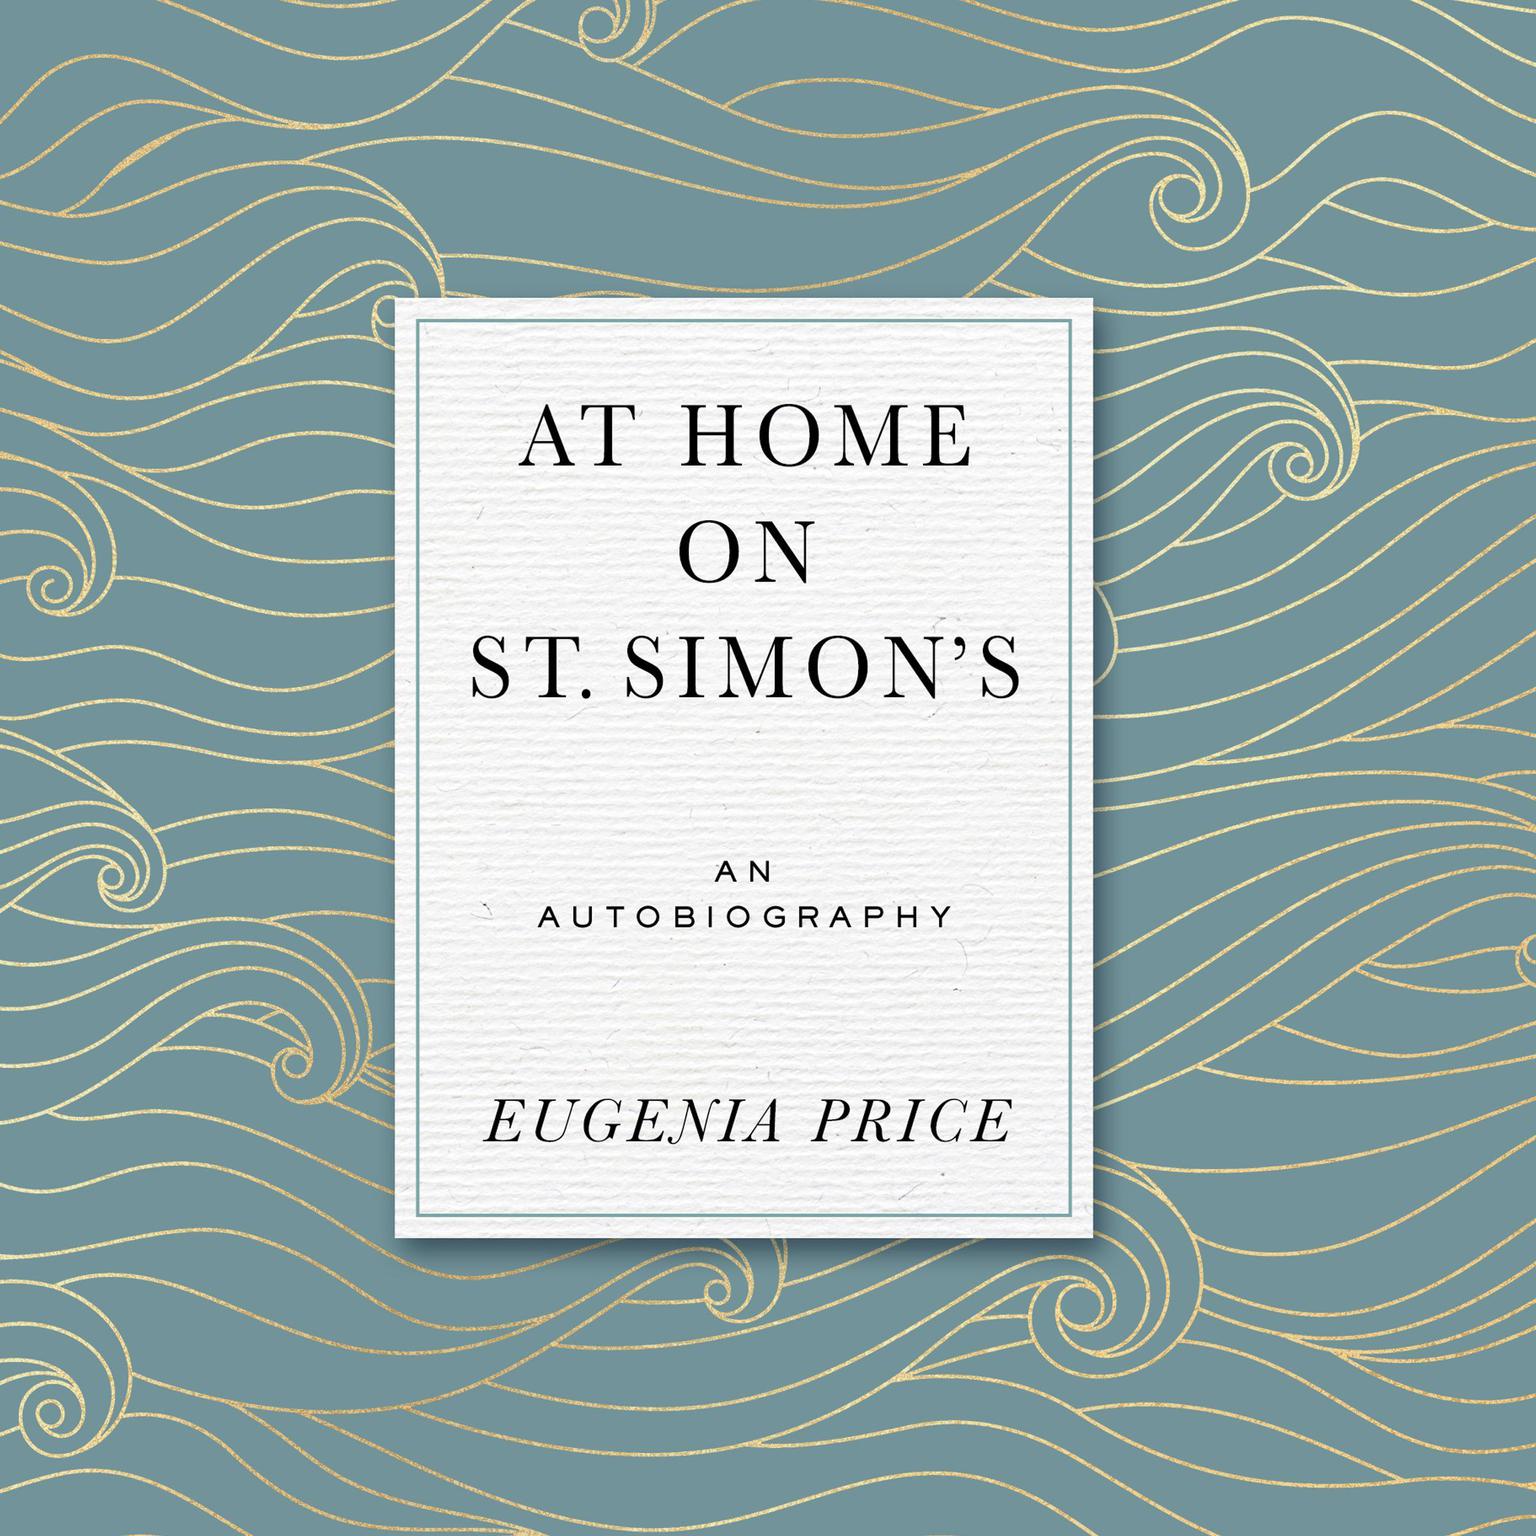 At Home on St. Simons Audiobook, by Eugenia Price